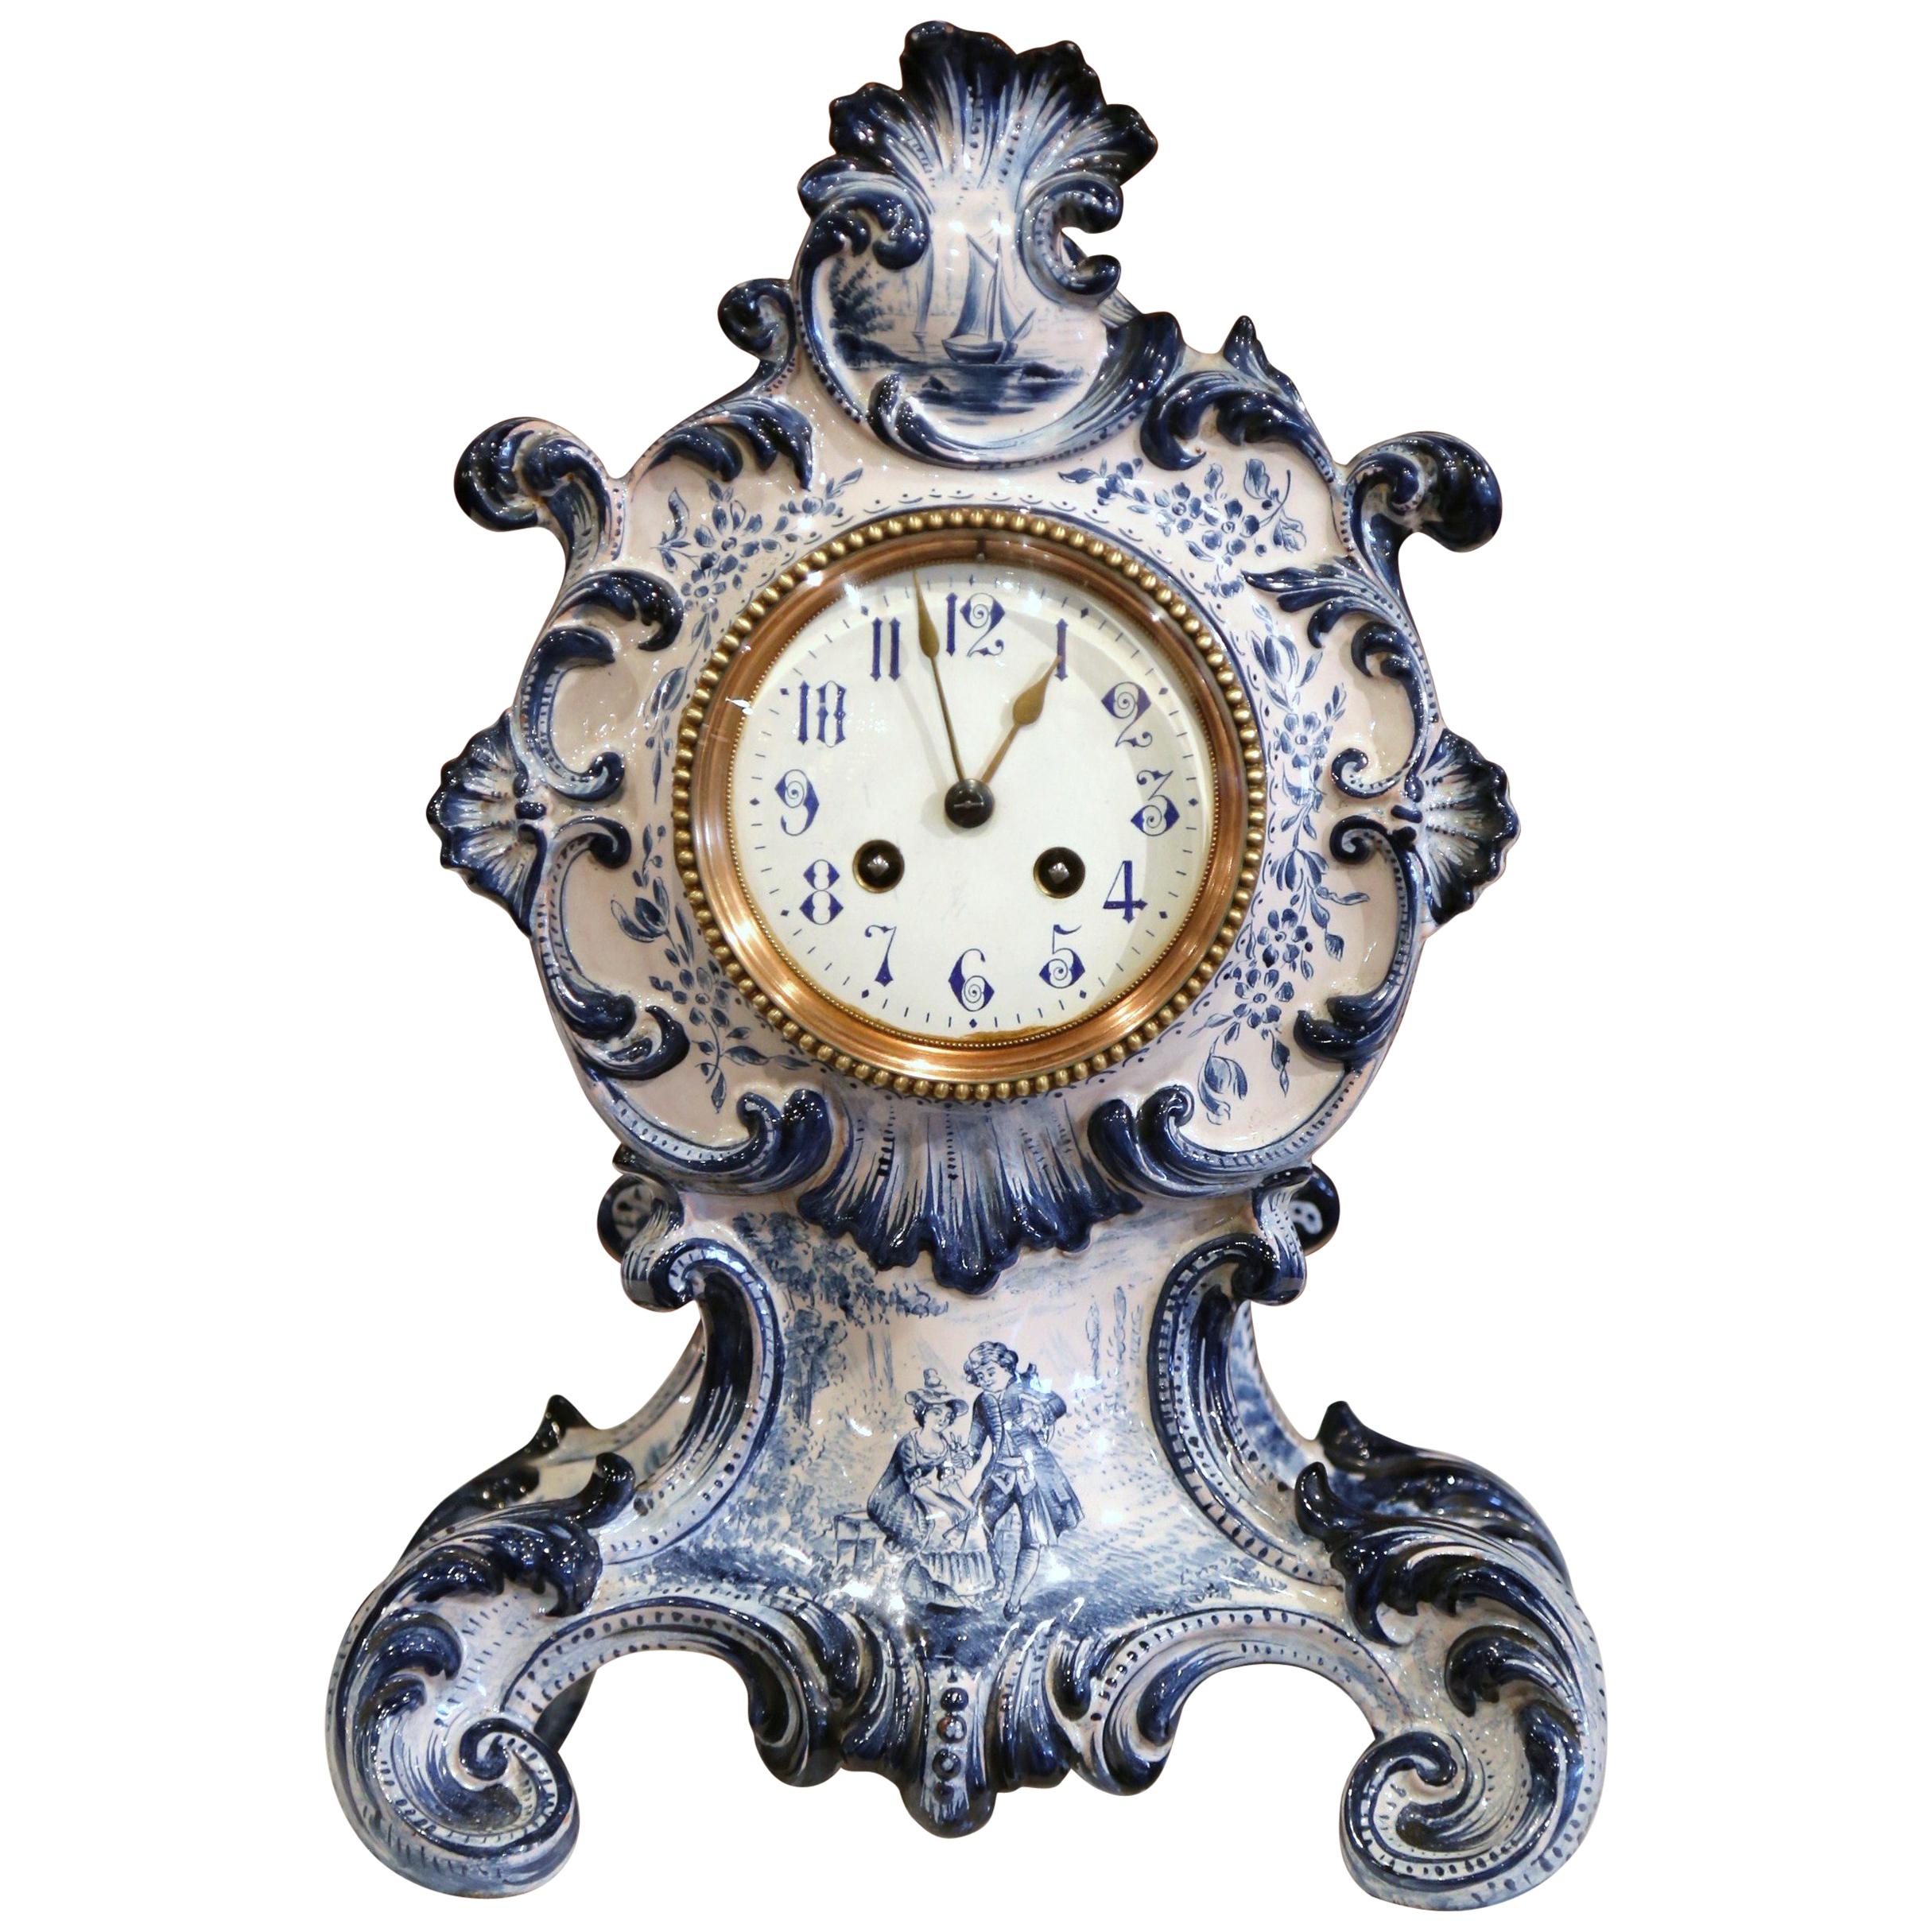 Late 19th Century French Hand-Painted Blue and White Faience Mantel Clock